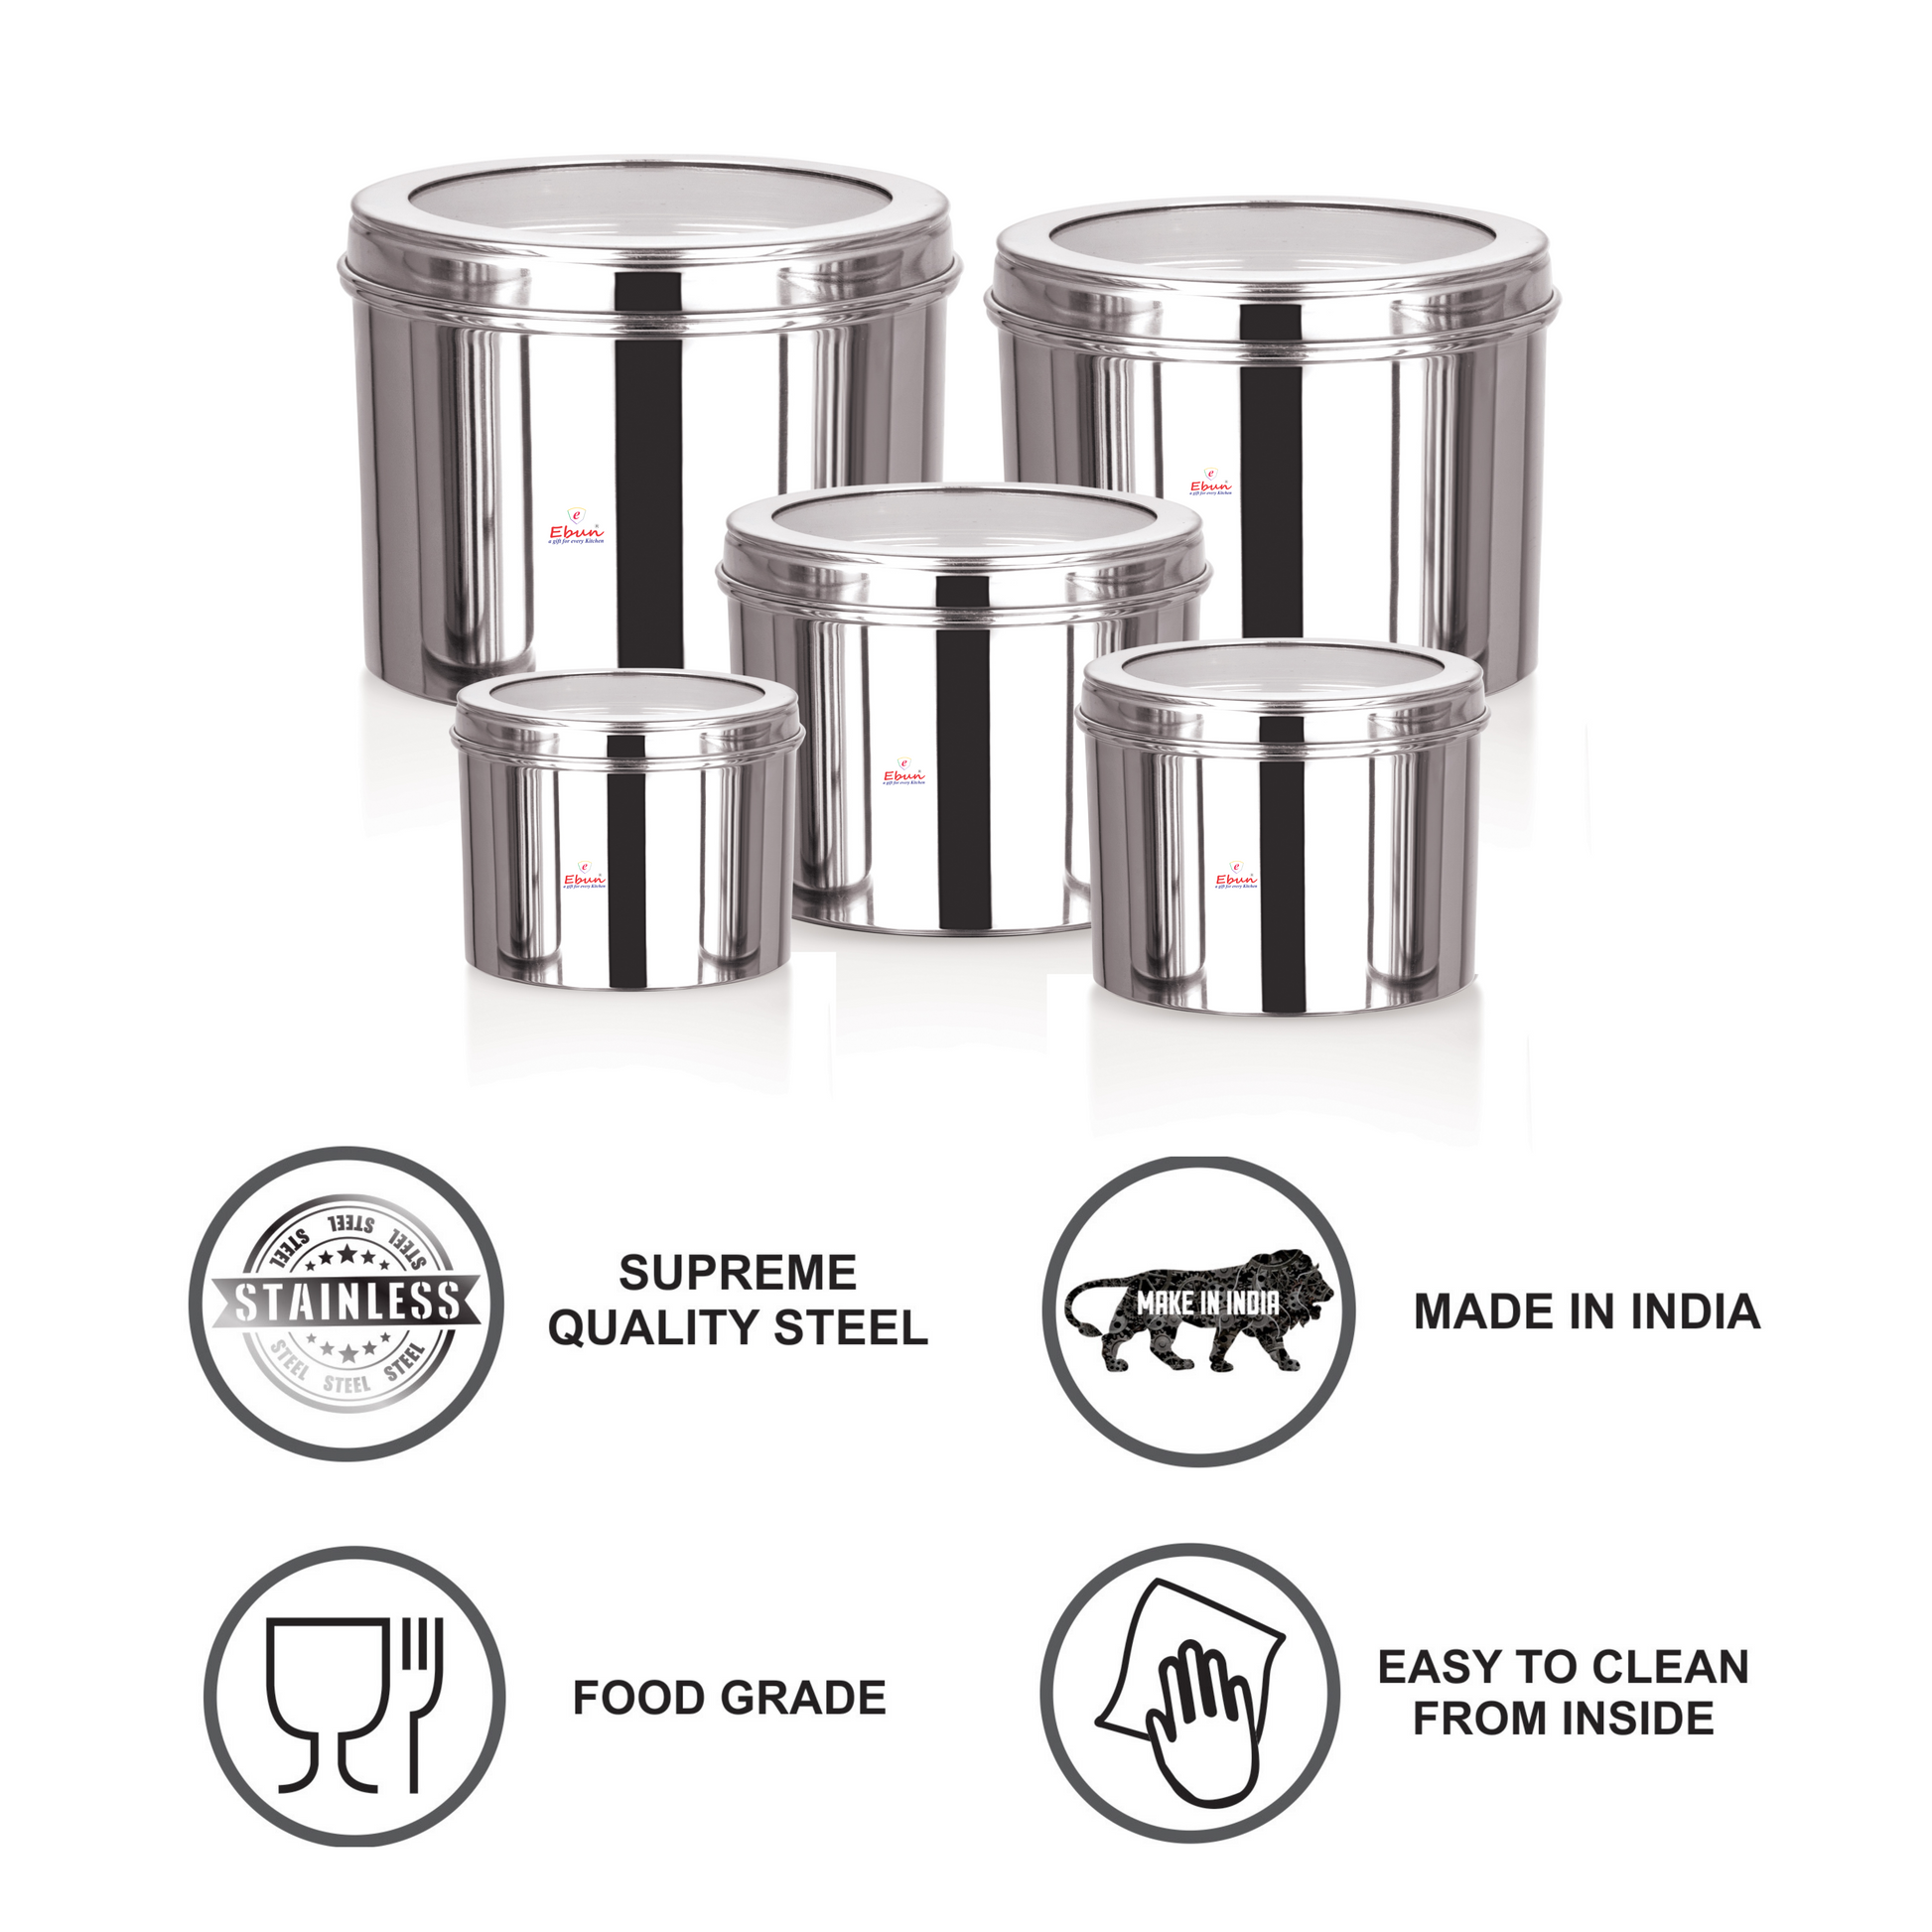 stainless steel storage containers |  stainless steel containers with lid | kitchen steel containers set | stainless steel container | steel airtight container | steel storage containers | steel containers for kitchen 2kg | steel storage containers for fridge | square steel container | stainless steel airtight container | steel container set | steel containers with lid | kitchen storage containers set steel | airtight steel containers | container for kitchen storage set steel